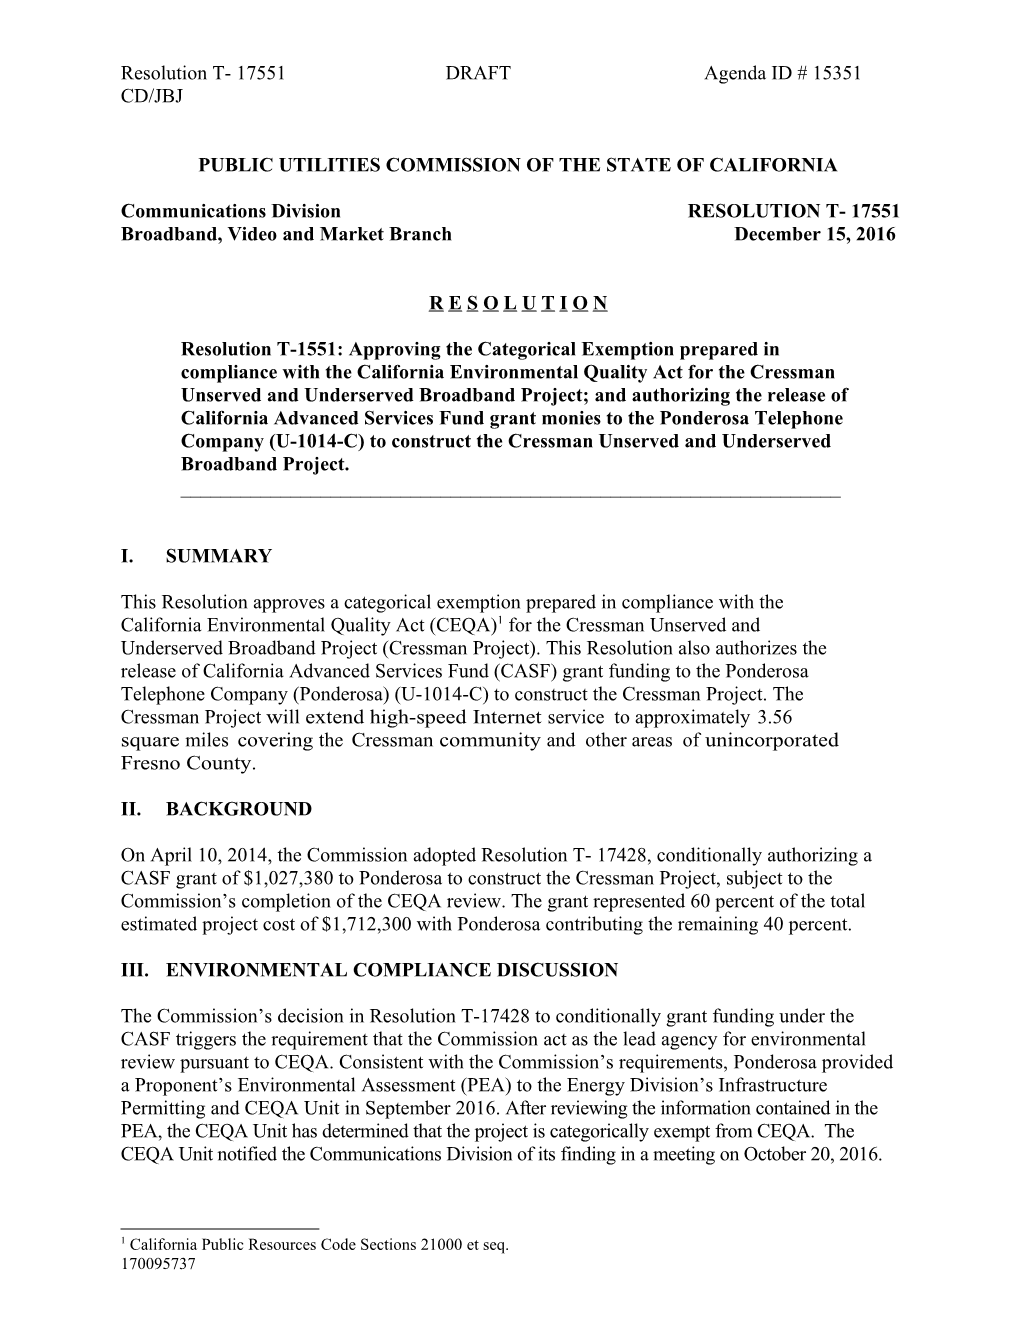 Public Utilities Commission of the State of California s138